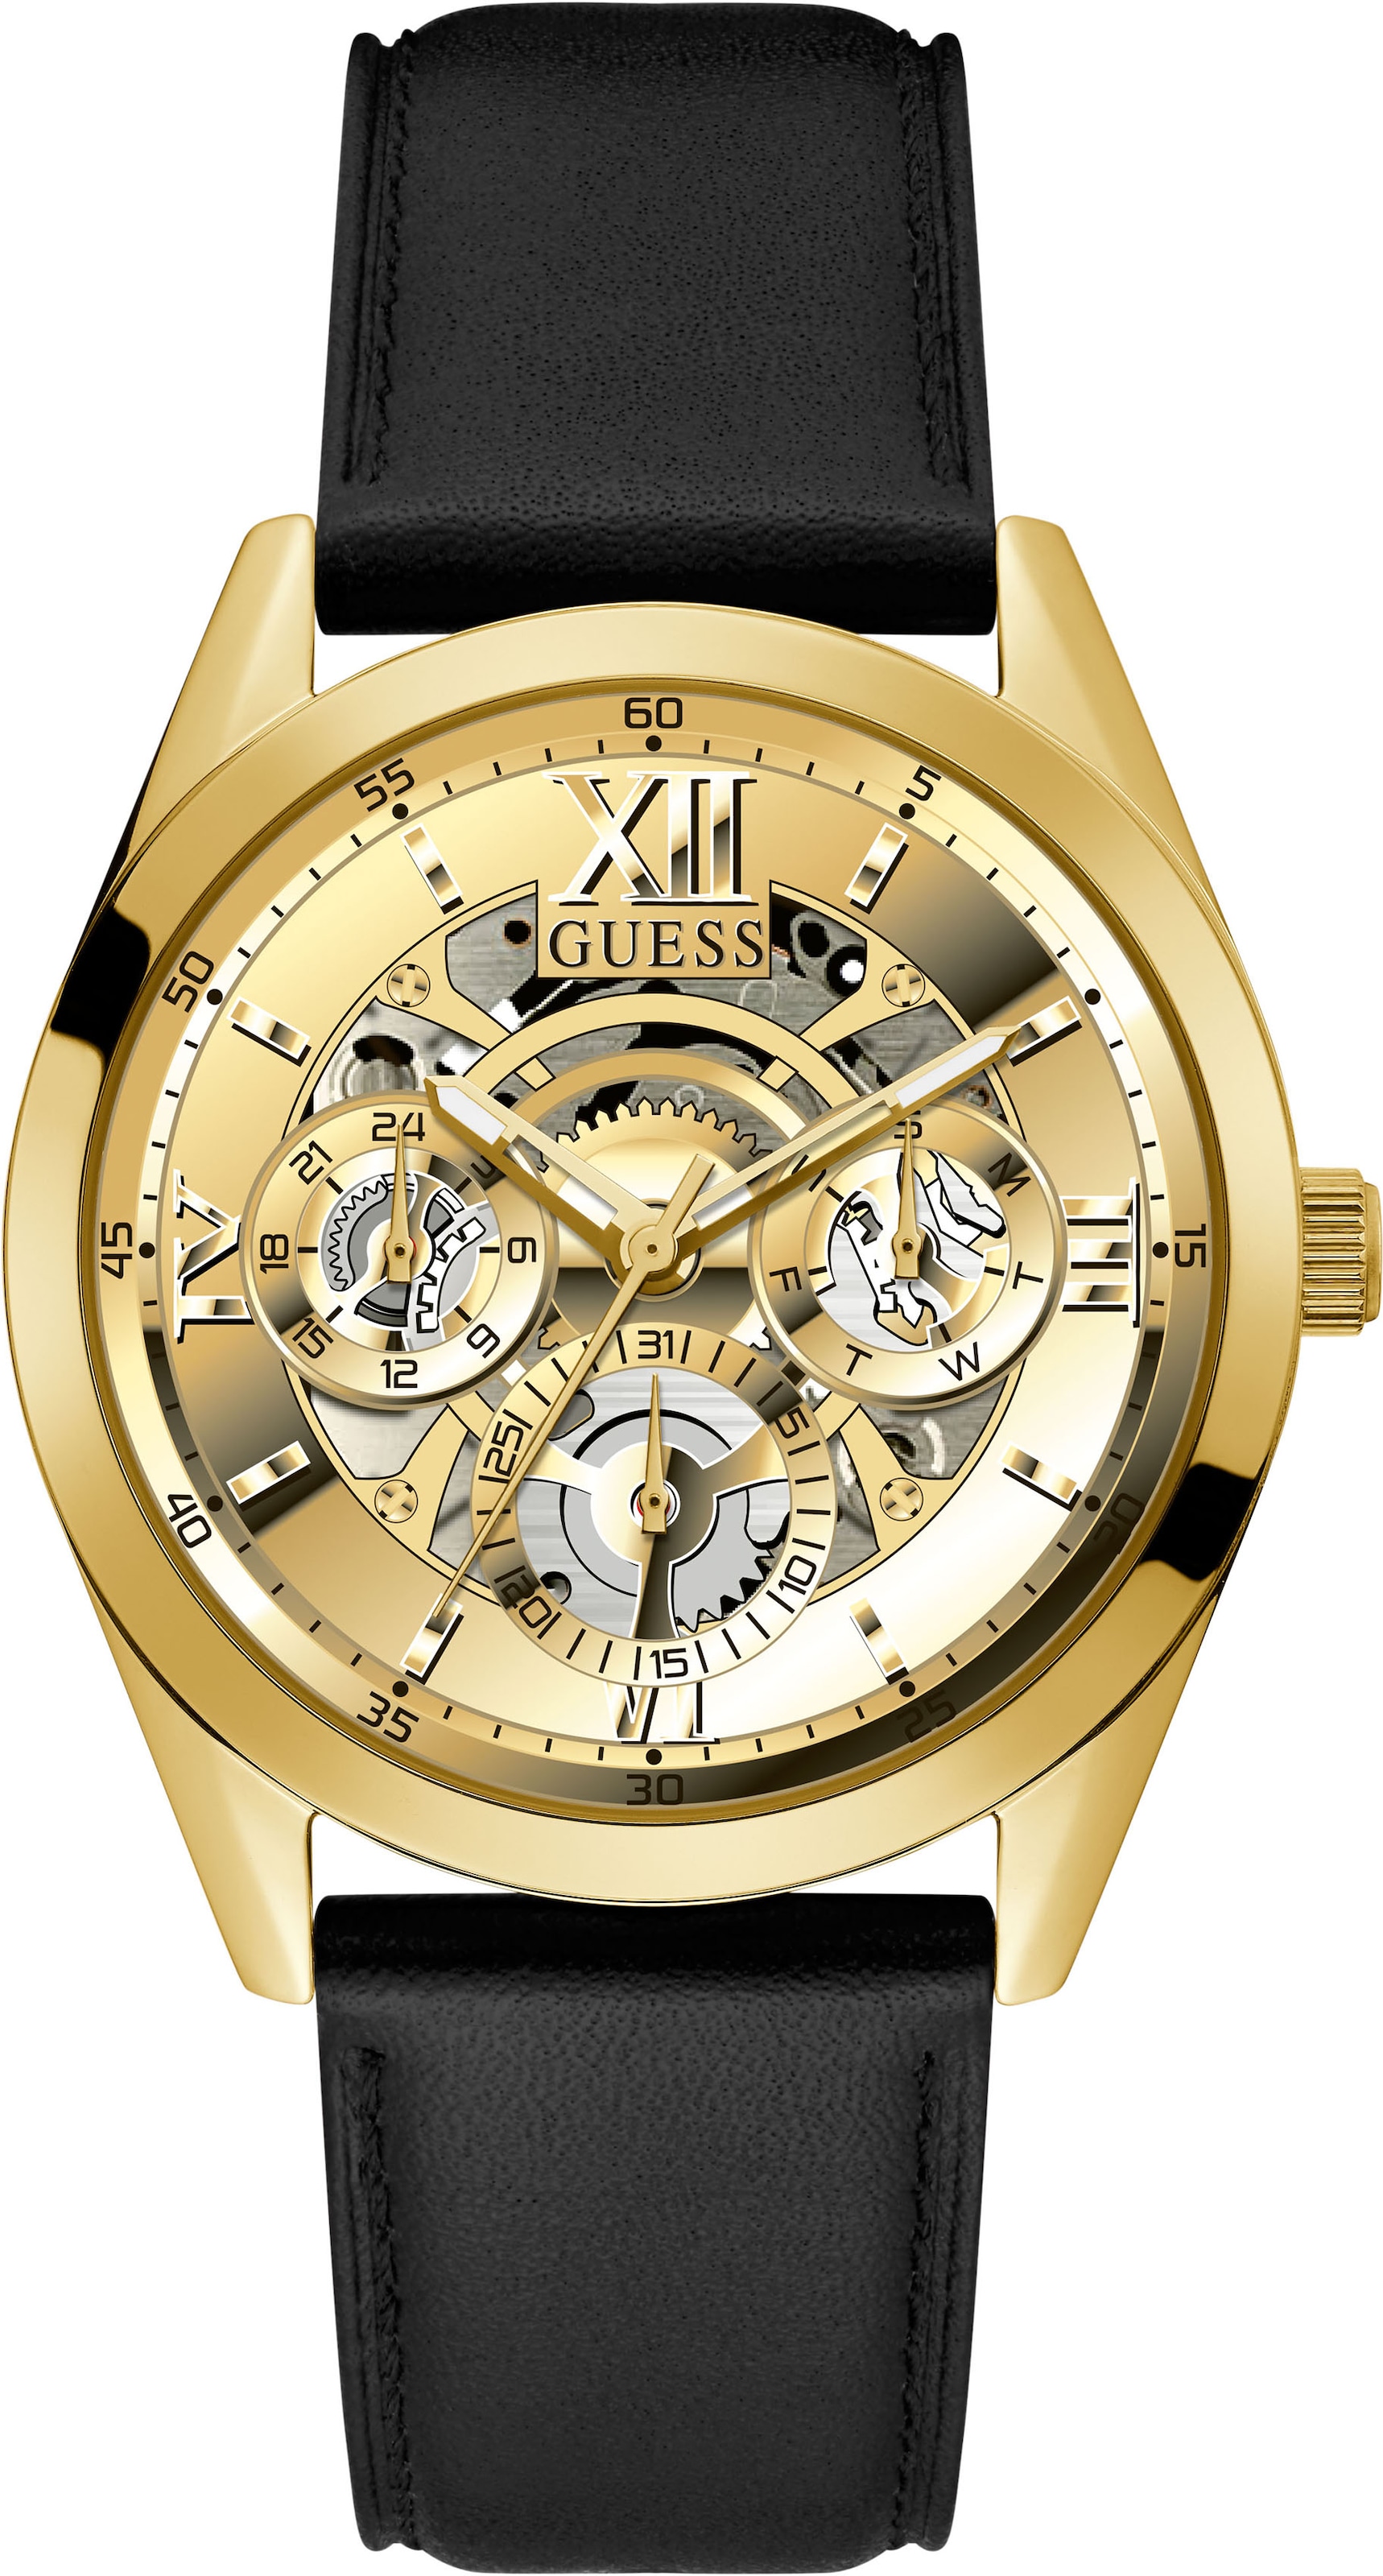 Guess Multifunktionsuhr »TAILOR, GW0389G2« kaufen | I'm walking